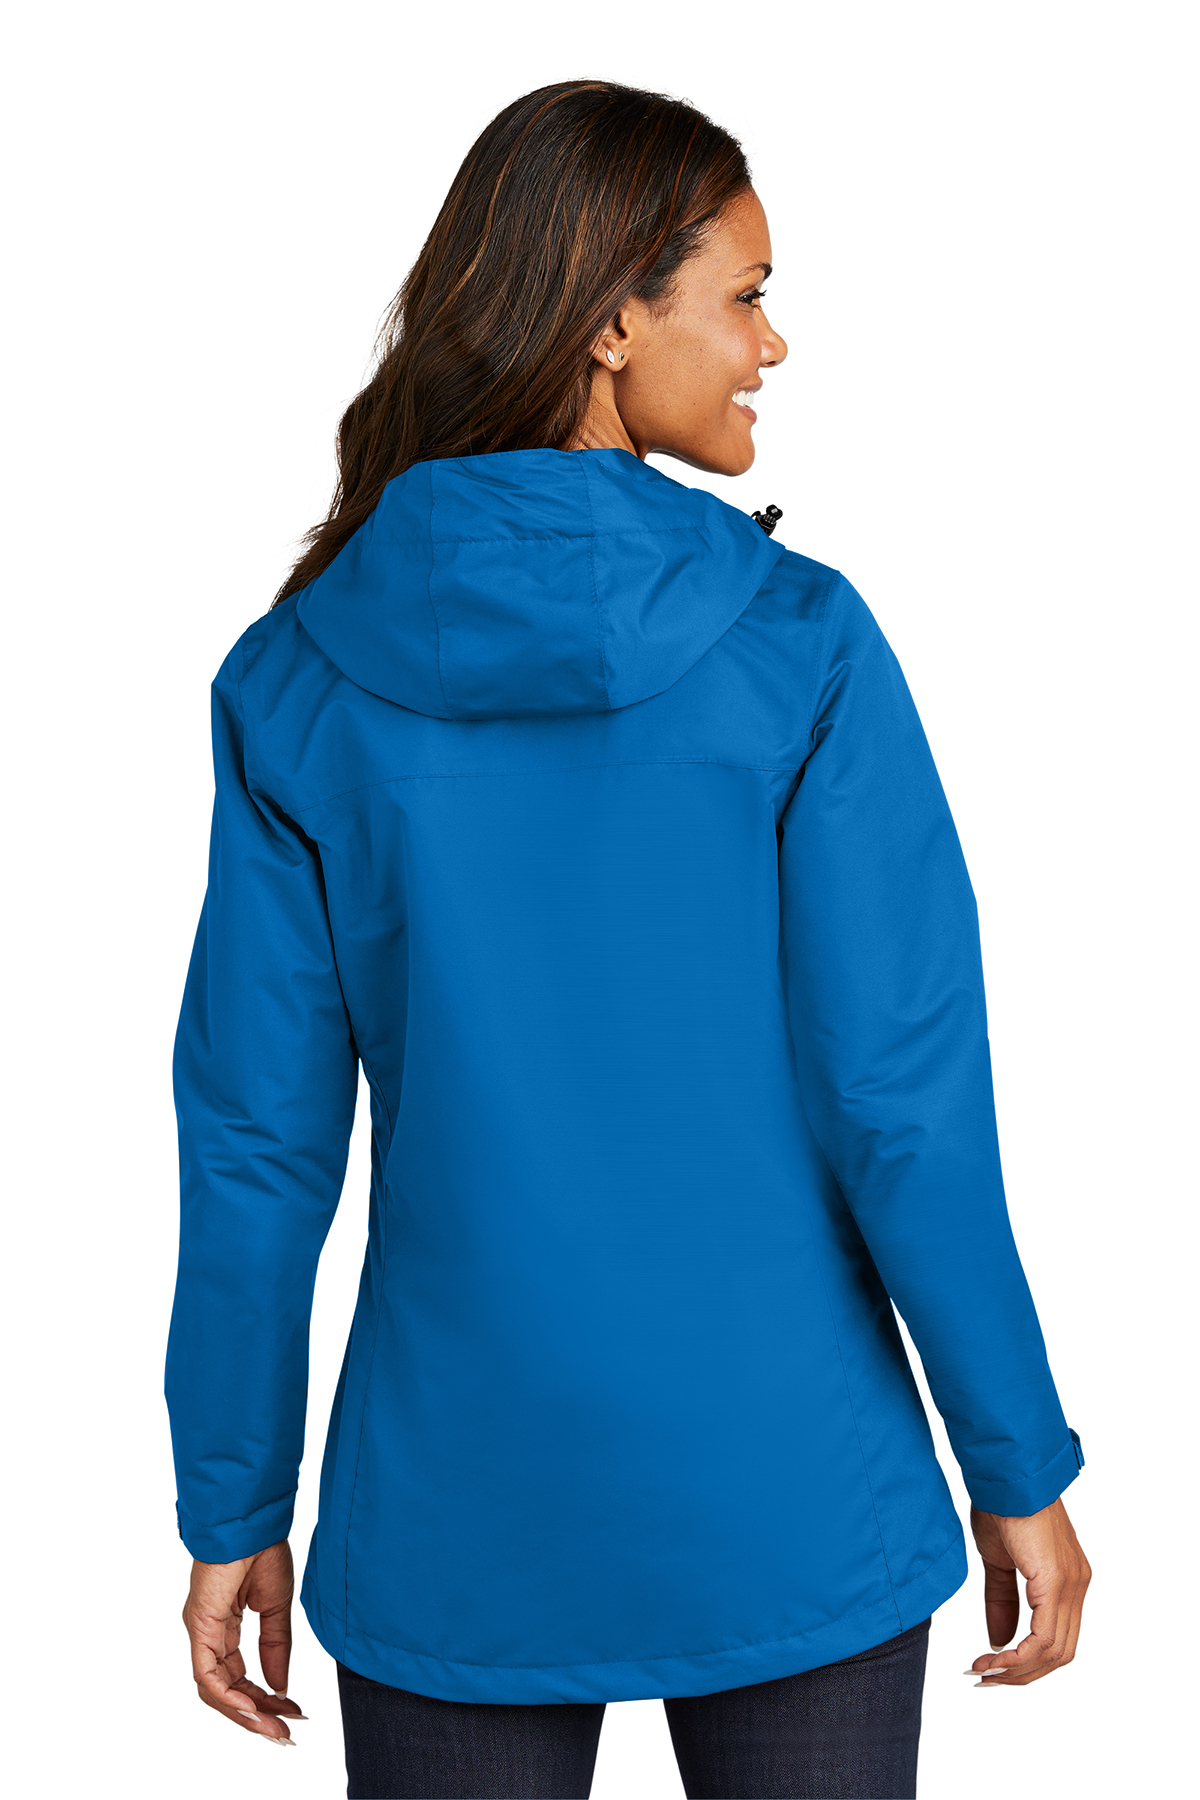 Port Authority Ladies | Jacket All-Conditions | SanMar Product